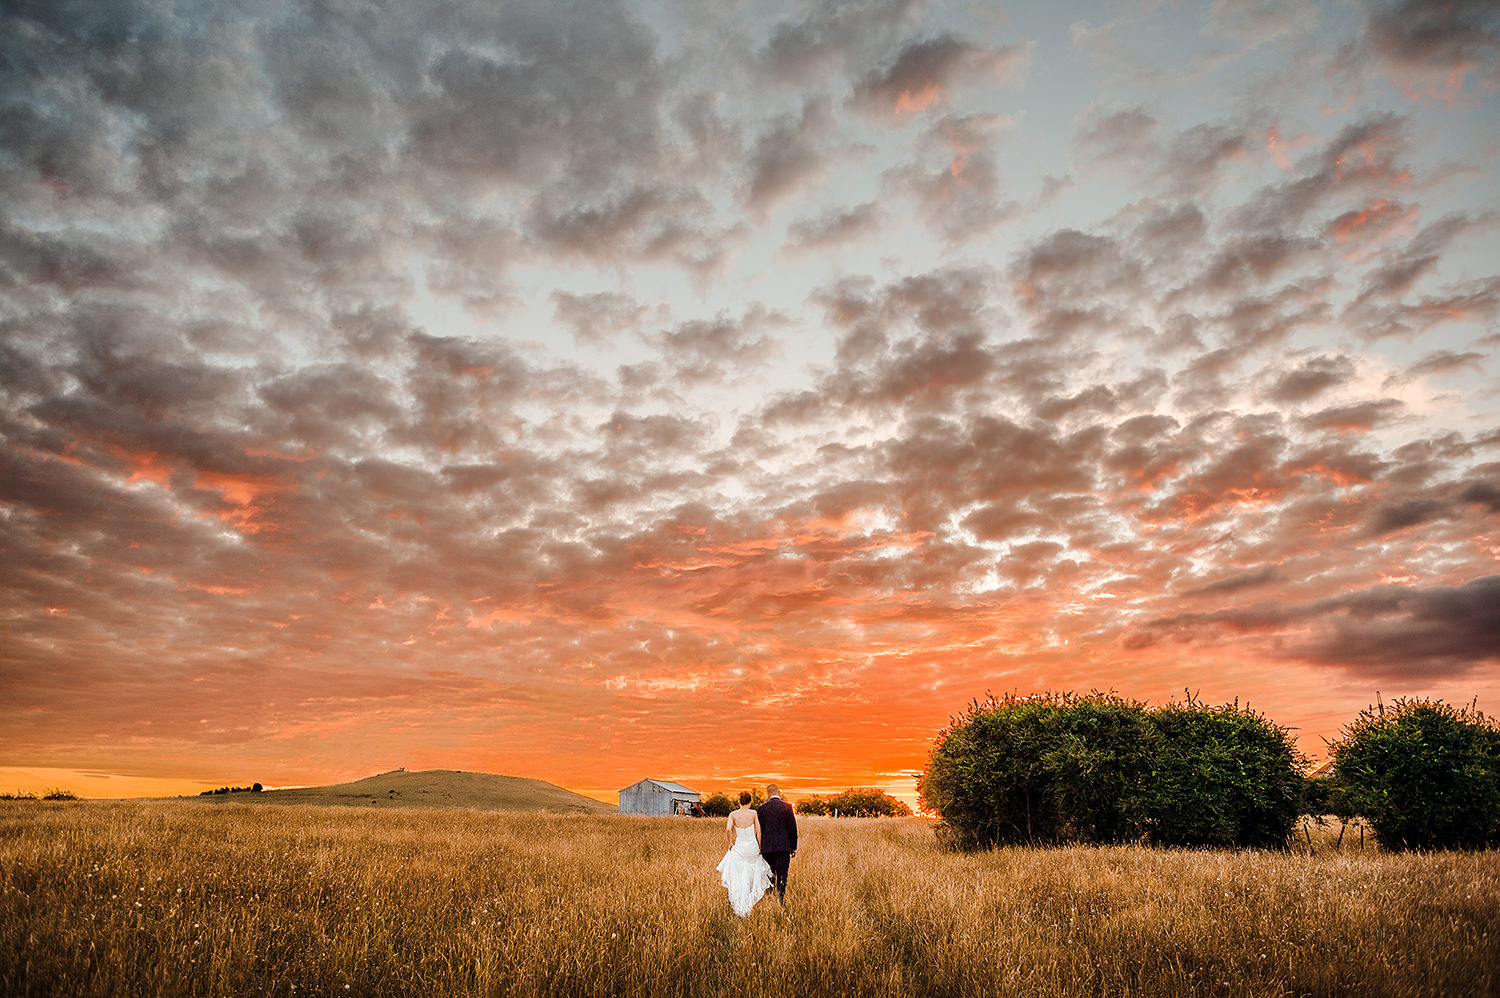 Couple walking into field at sunset.jpg